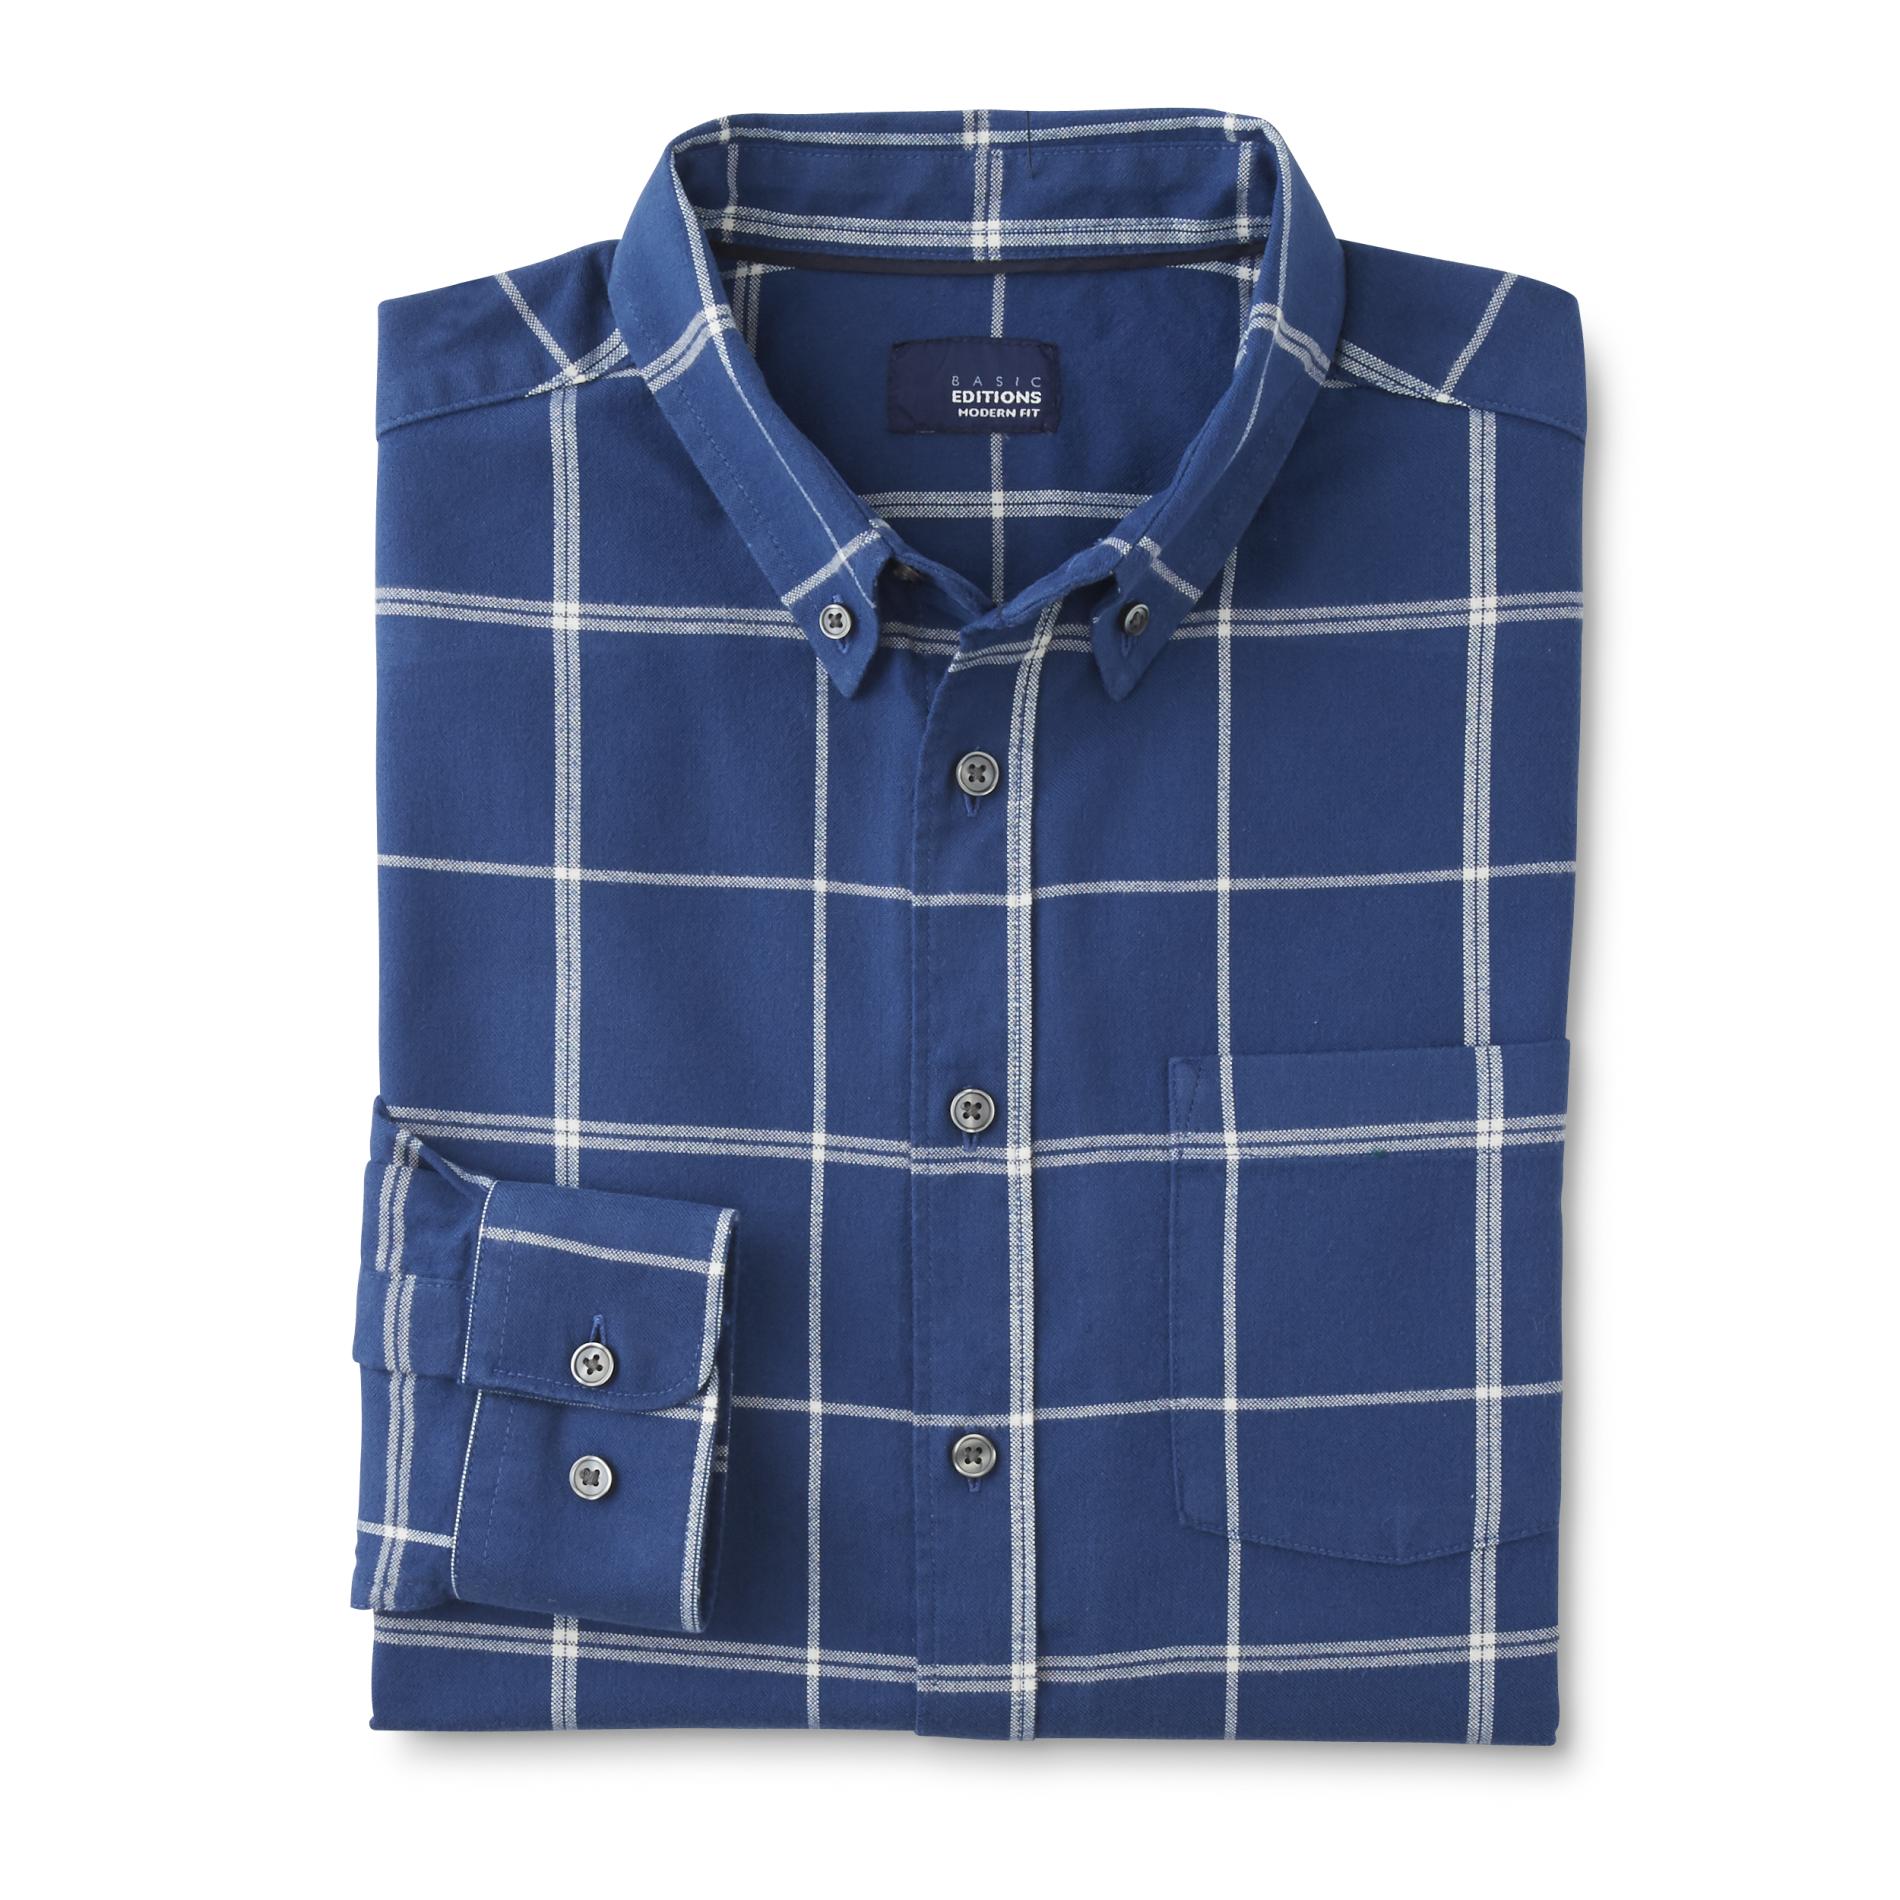 Basic Editions Men's Big & Tall Button-Front Oxford Shirt - Plaid